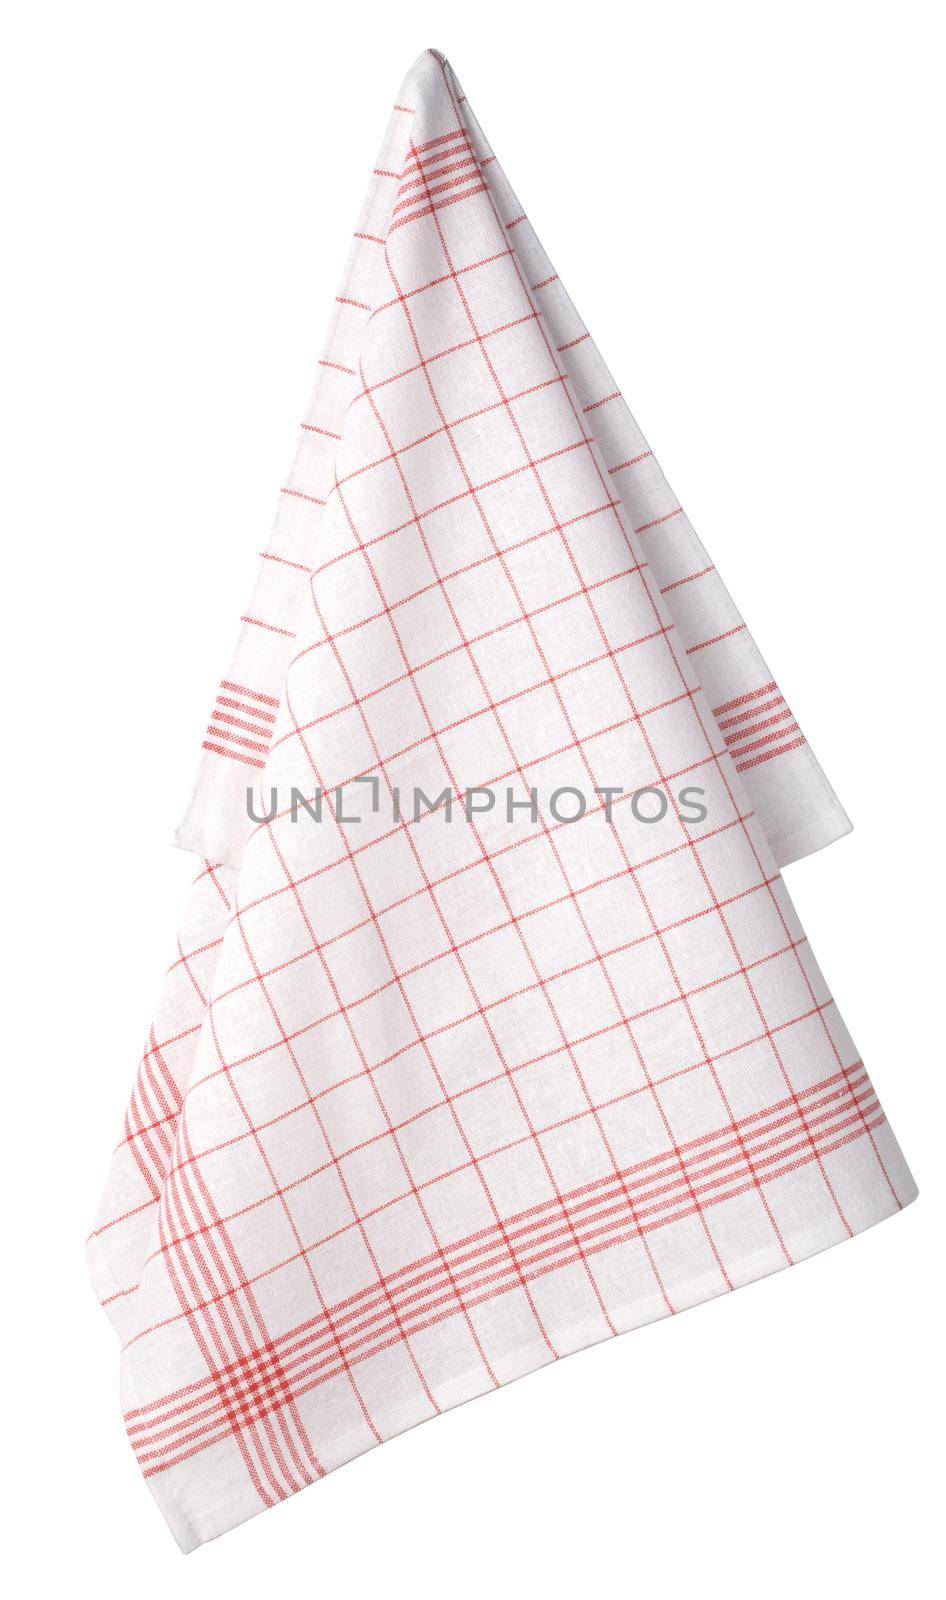 Kitchen towel hanging isolated on white background